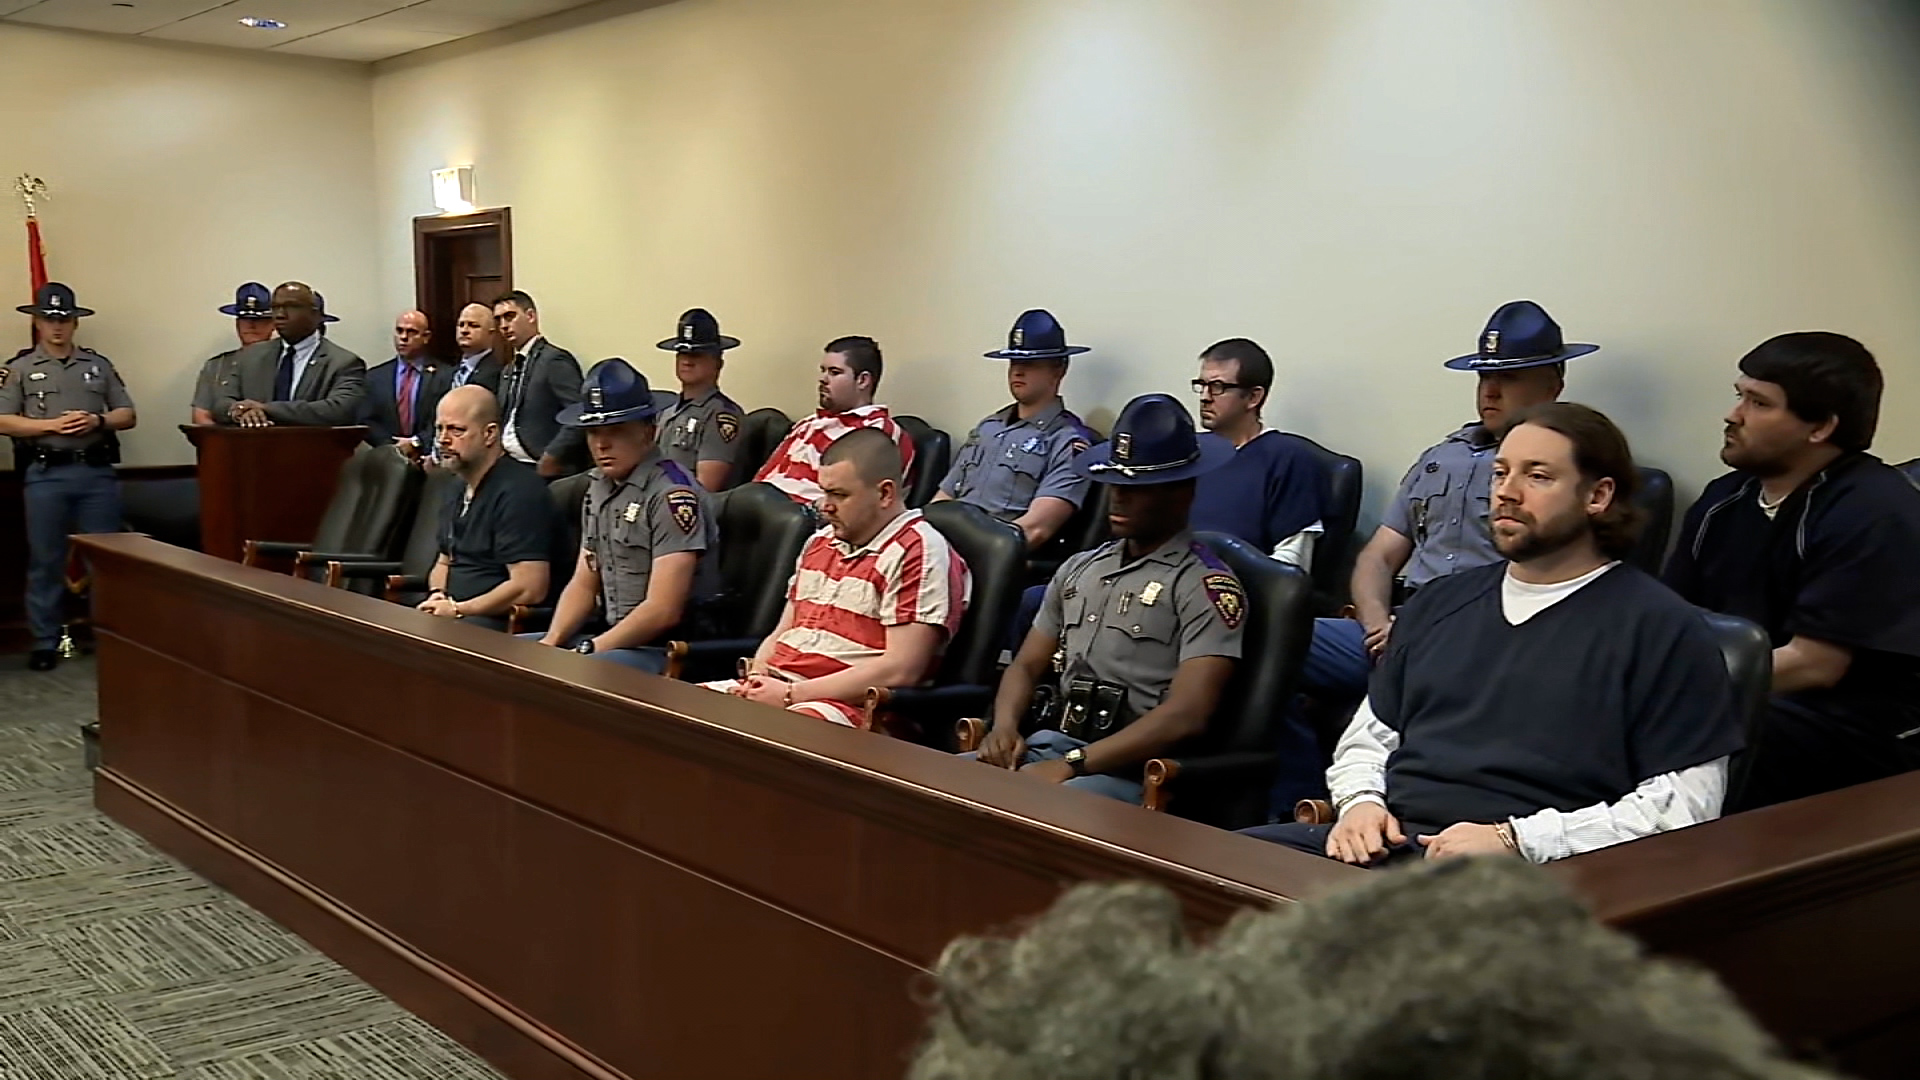 The six former Mississippi law enforcement officers are seen in court during their state sentencing hearing on Wednesday.